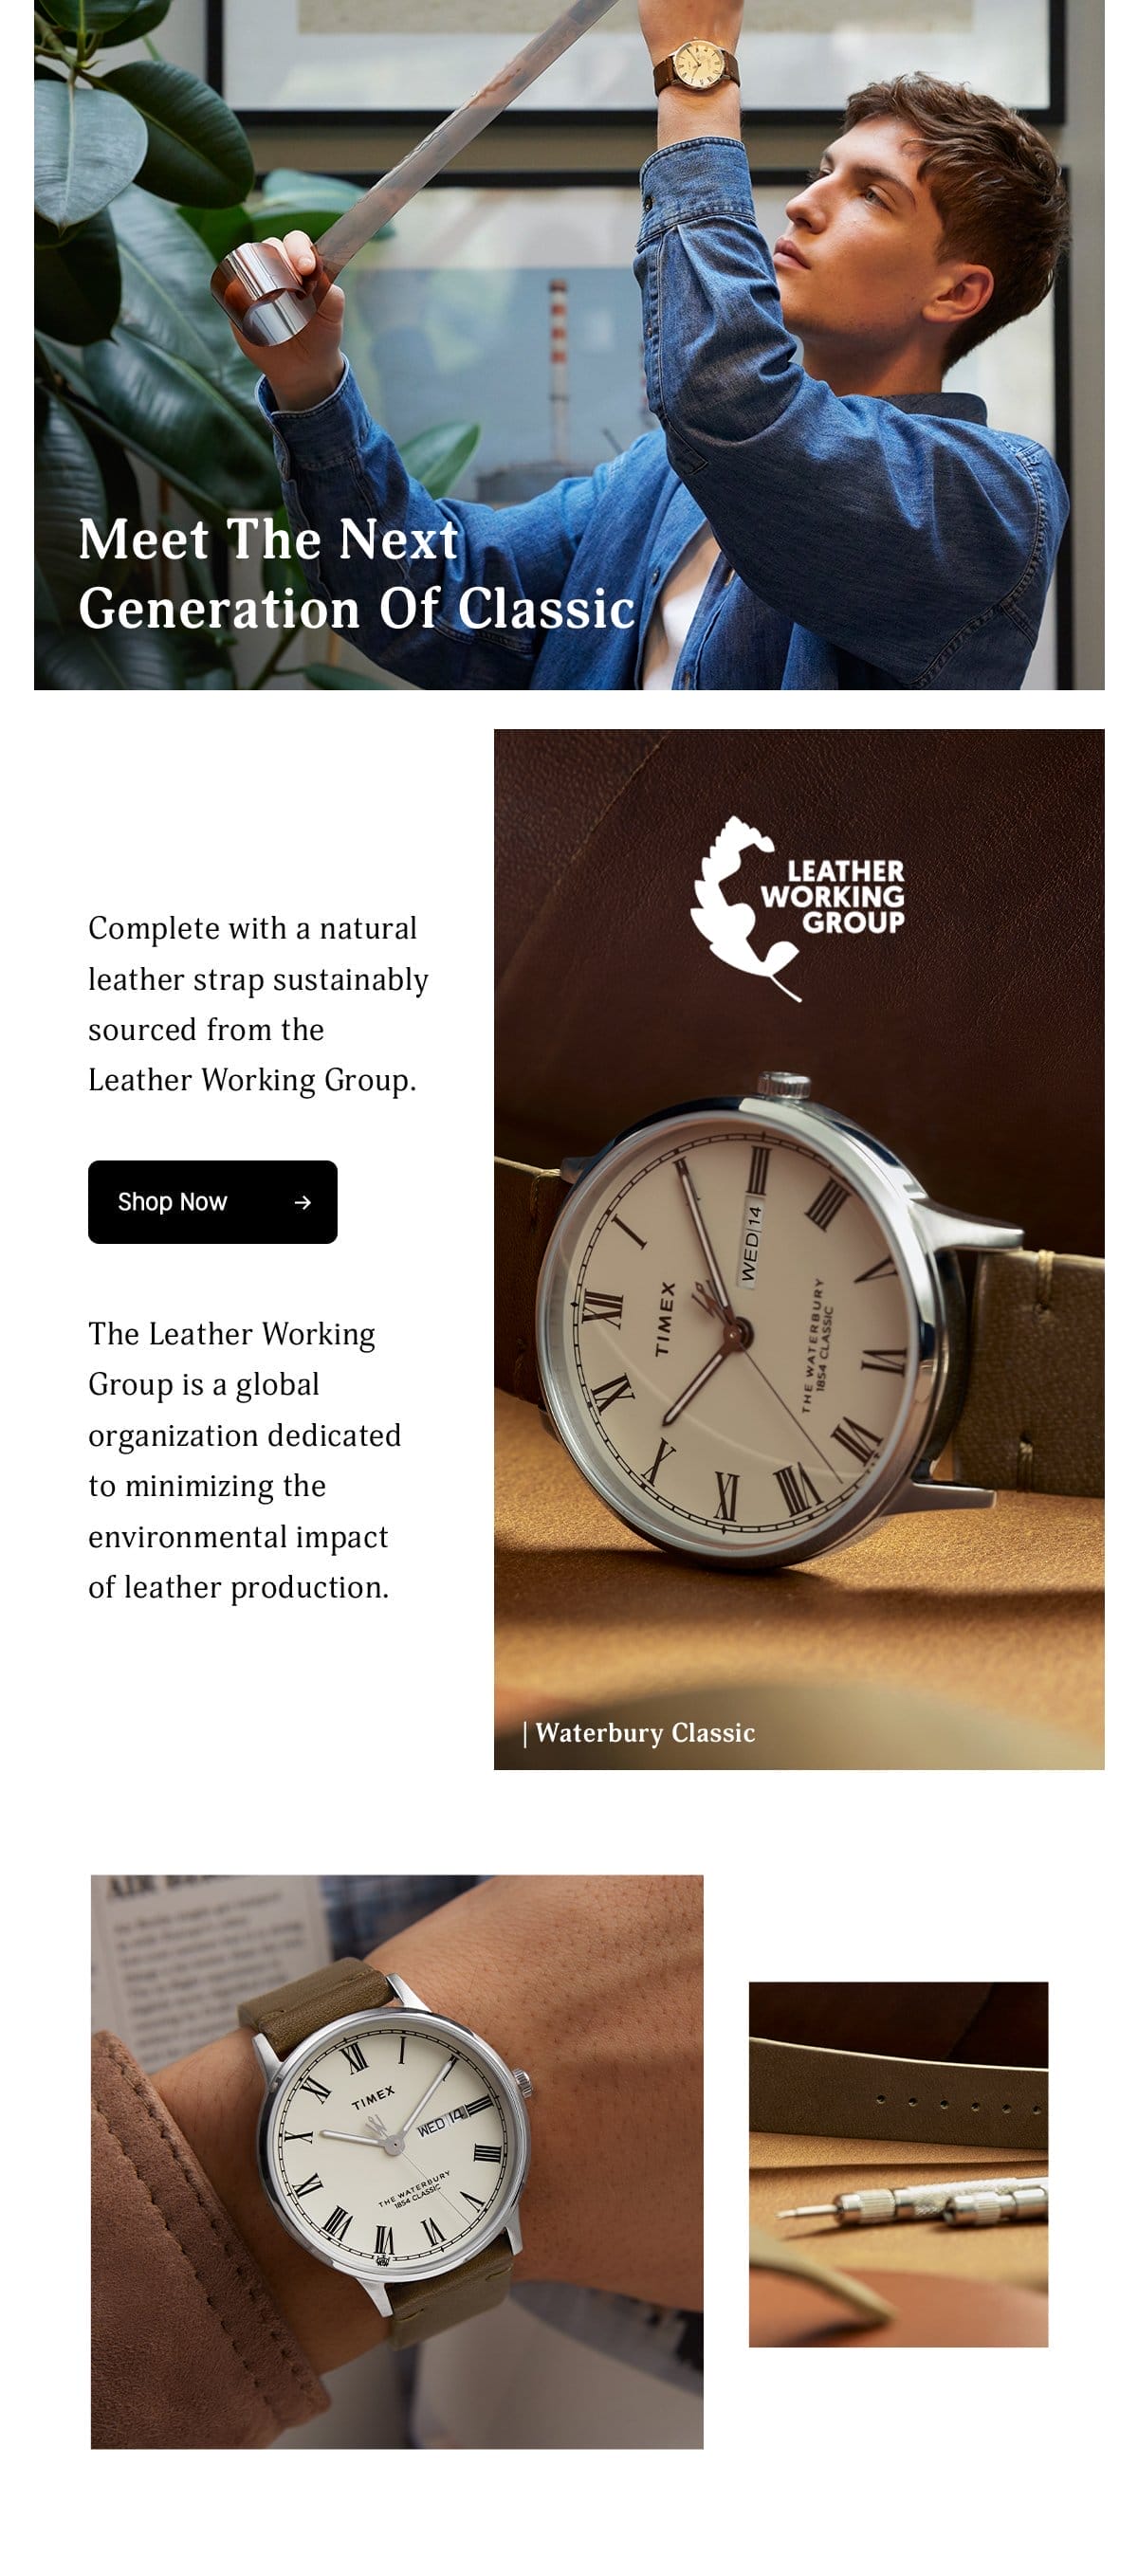 Meet The Next Generation Of Classic | Complete with a natural leather strap sustainably sourced from the Leather Working Group. | Shop Now | The Leather Working Group is a global organization dedicated to minimizing the environmental impact of leather production.